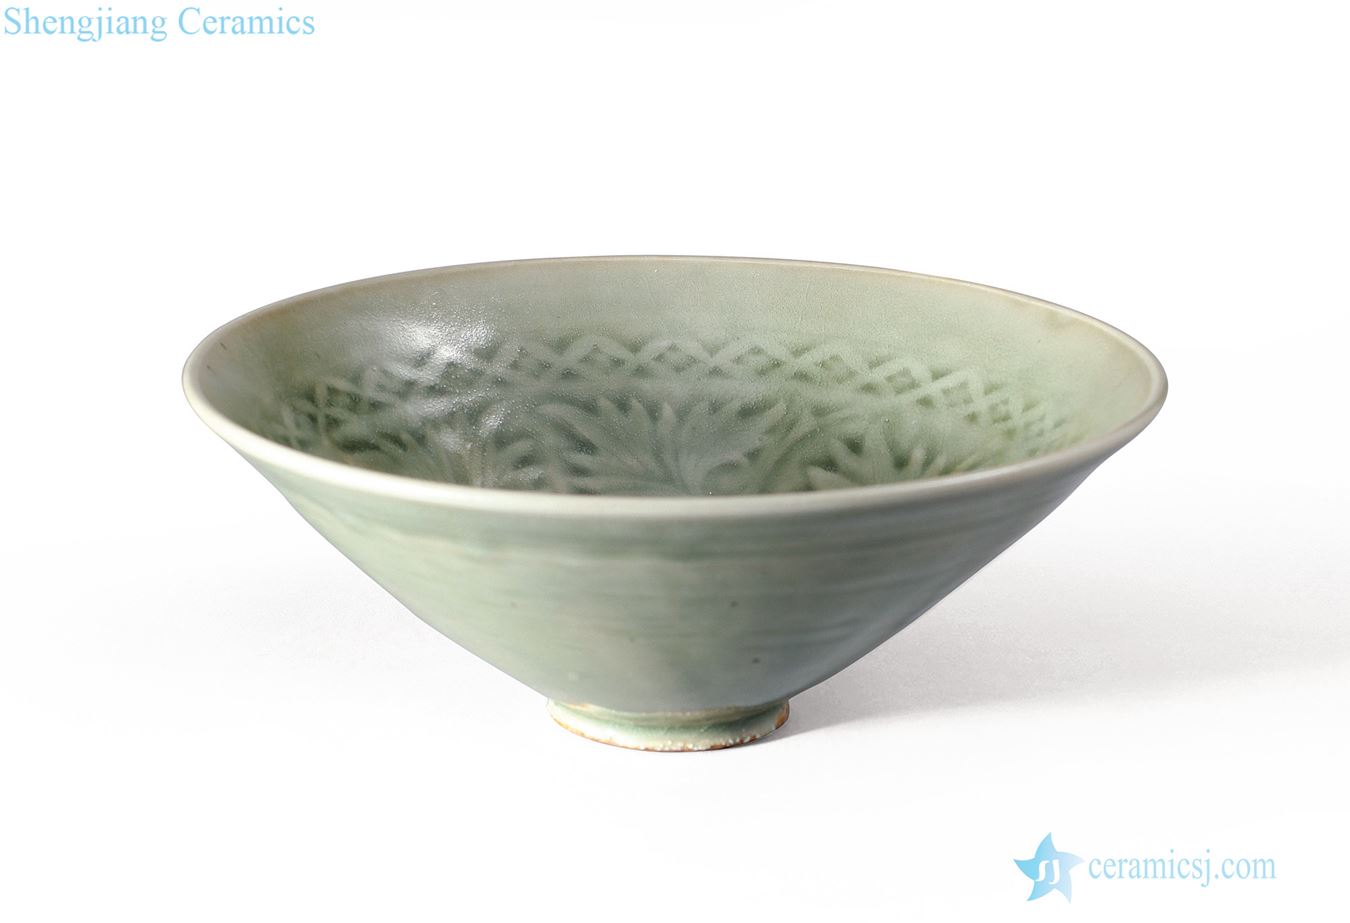 The song dynasty Yao state kiln printed bowls